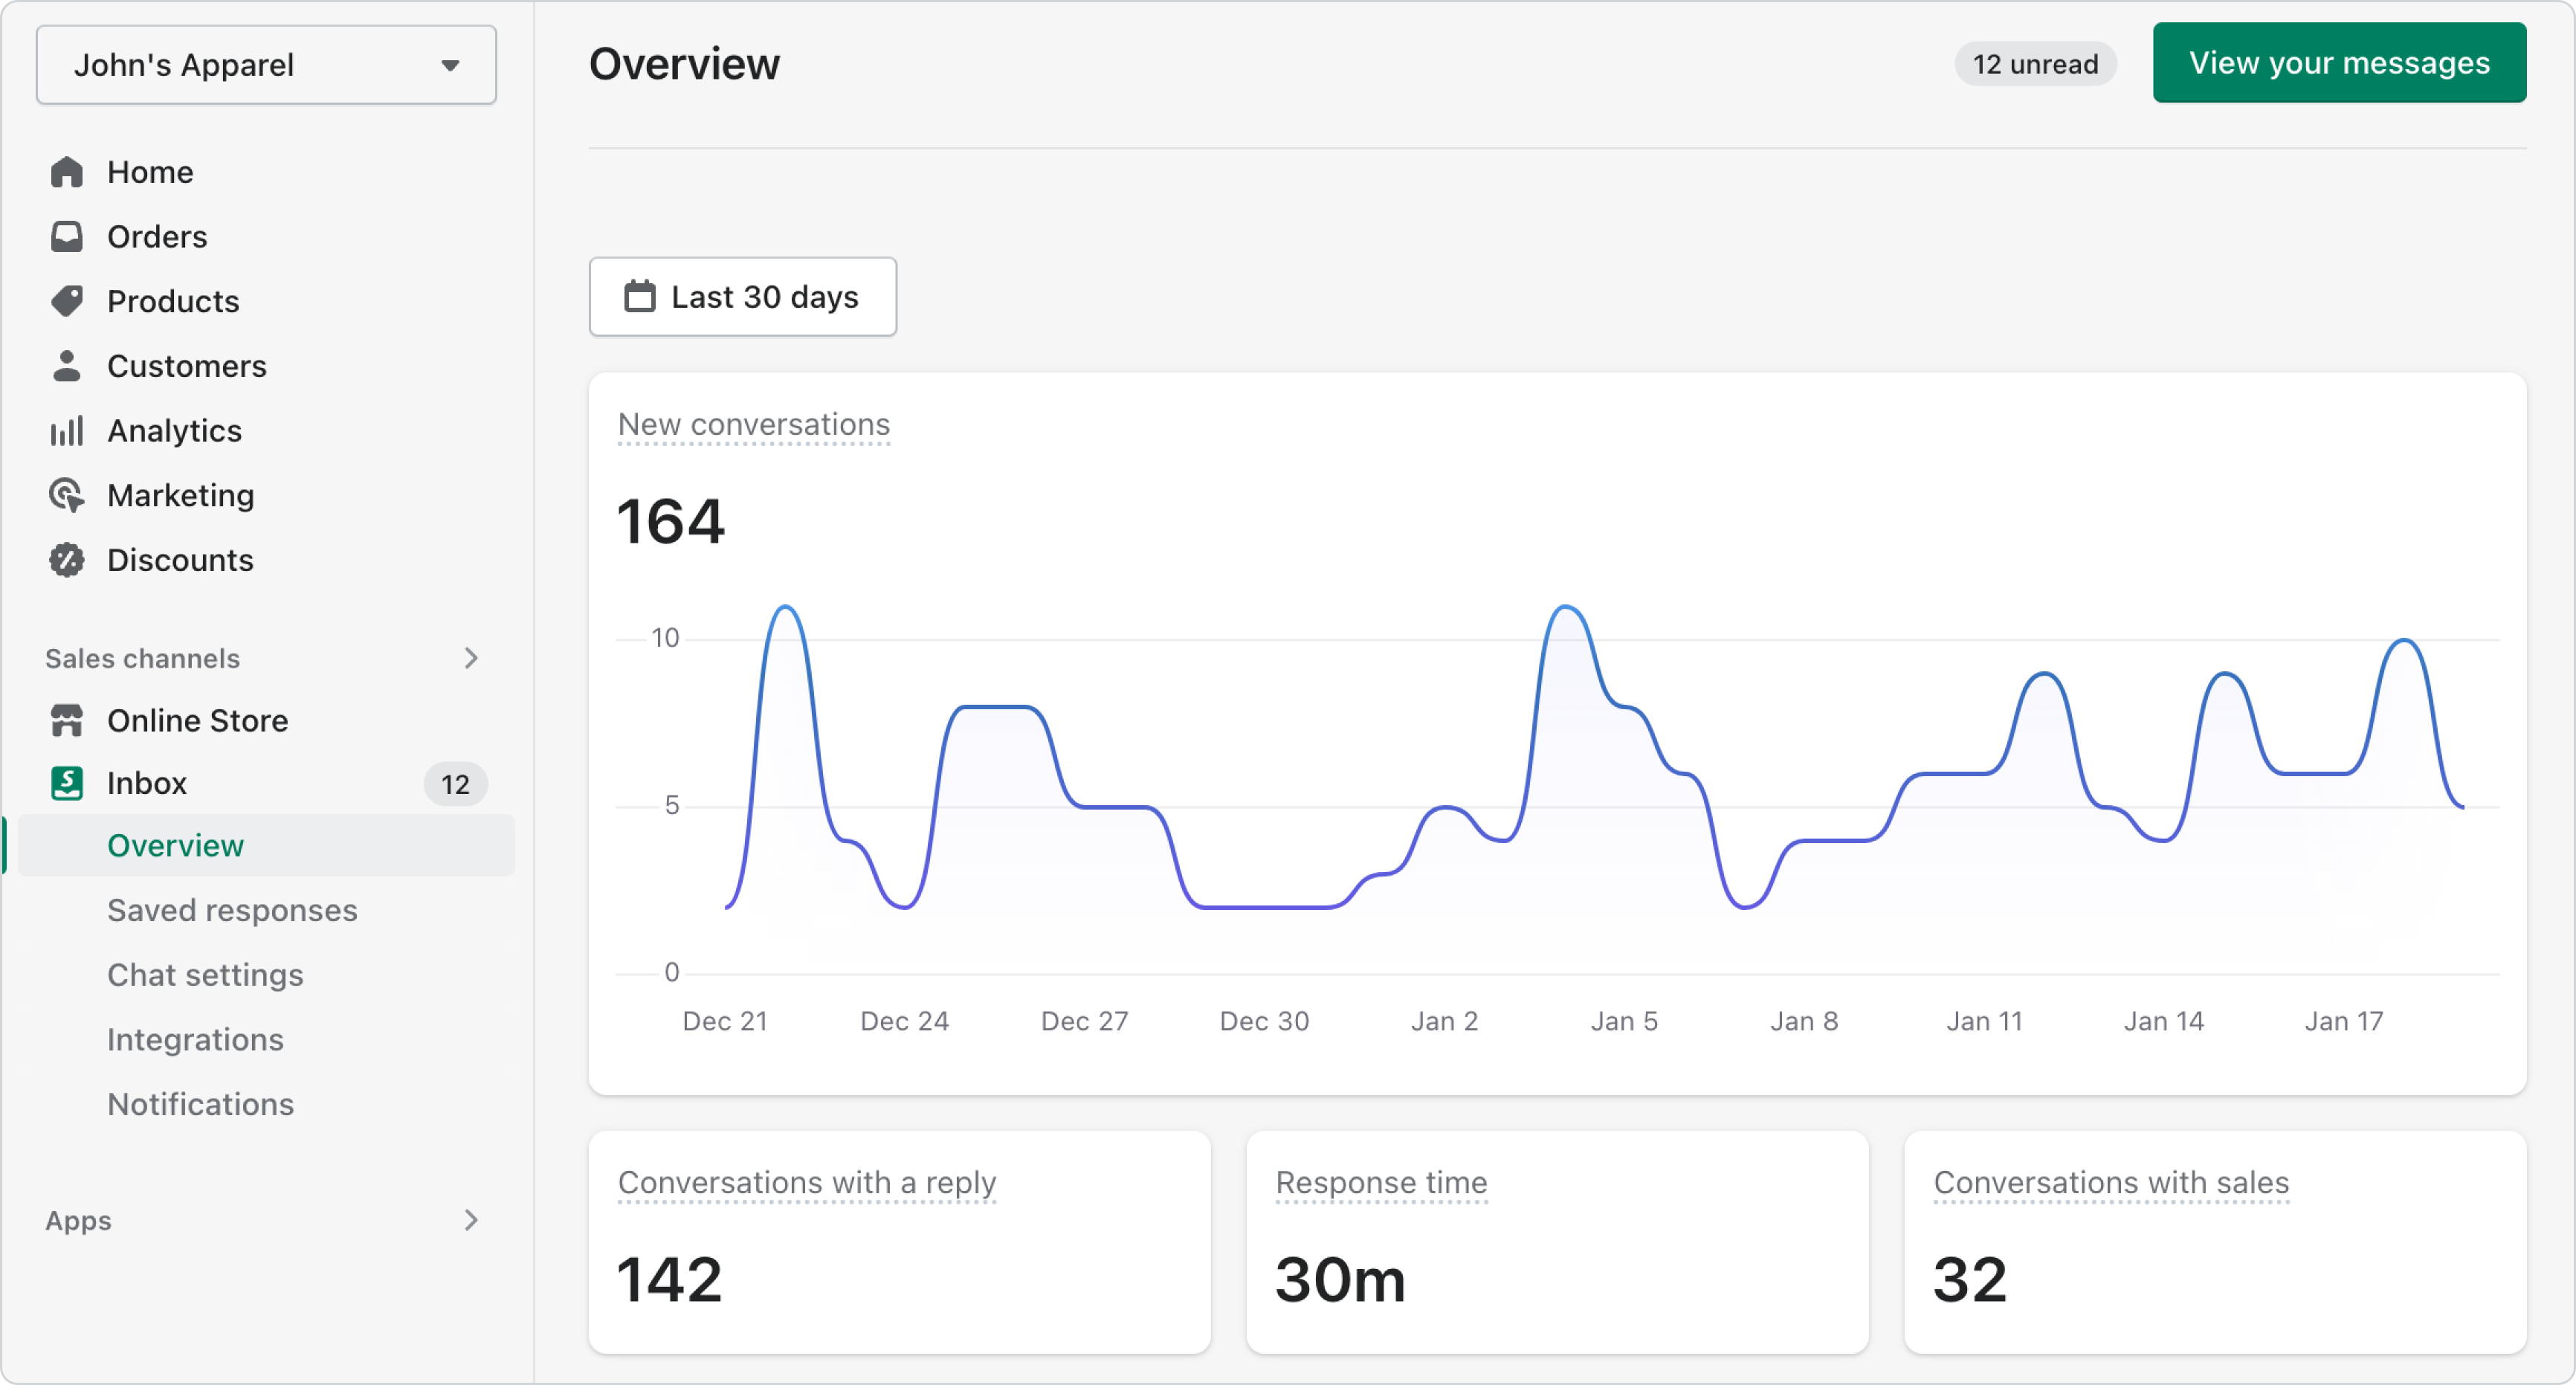 Screenshot of key metrics on the home page of the Shopify Inbox app.